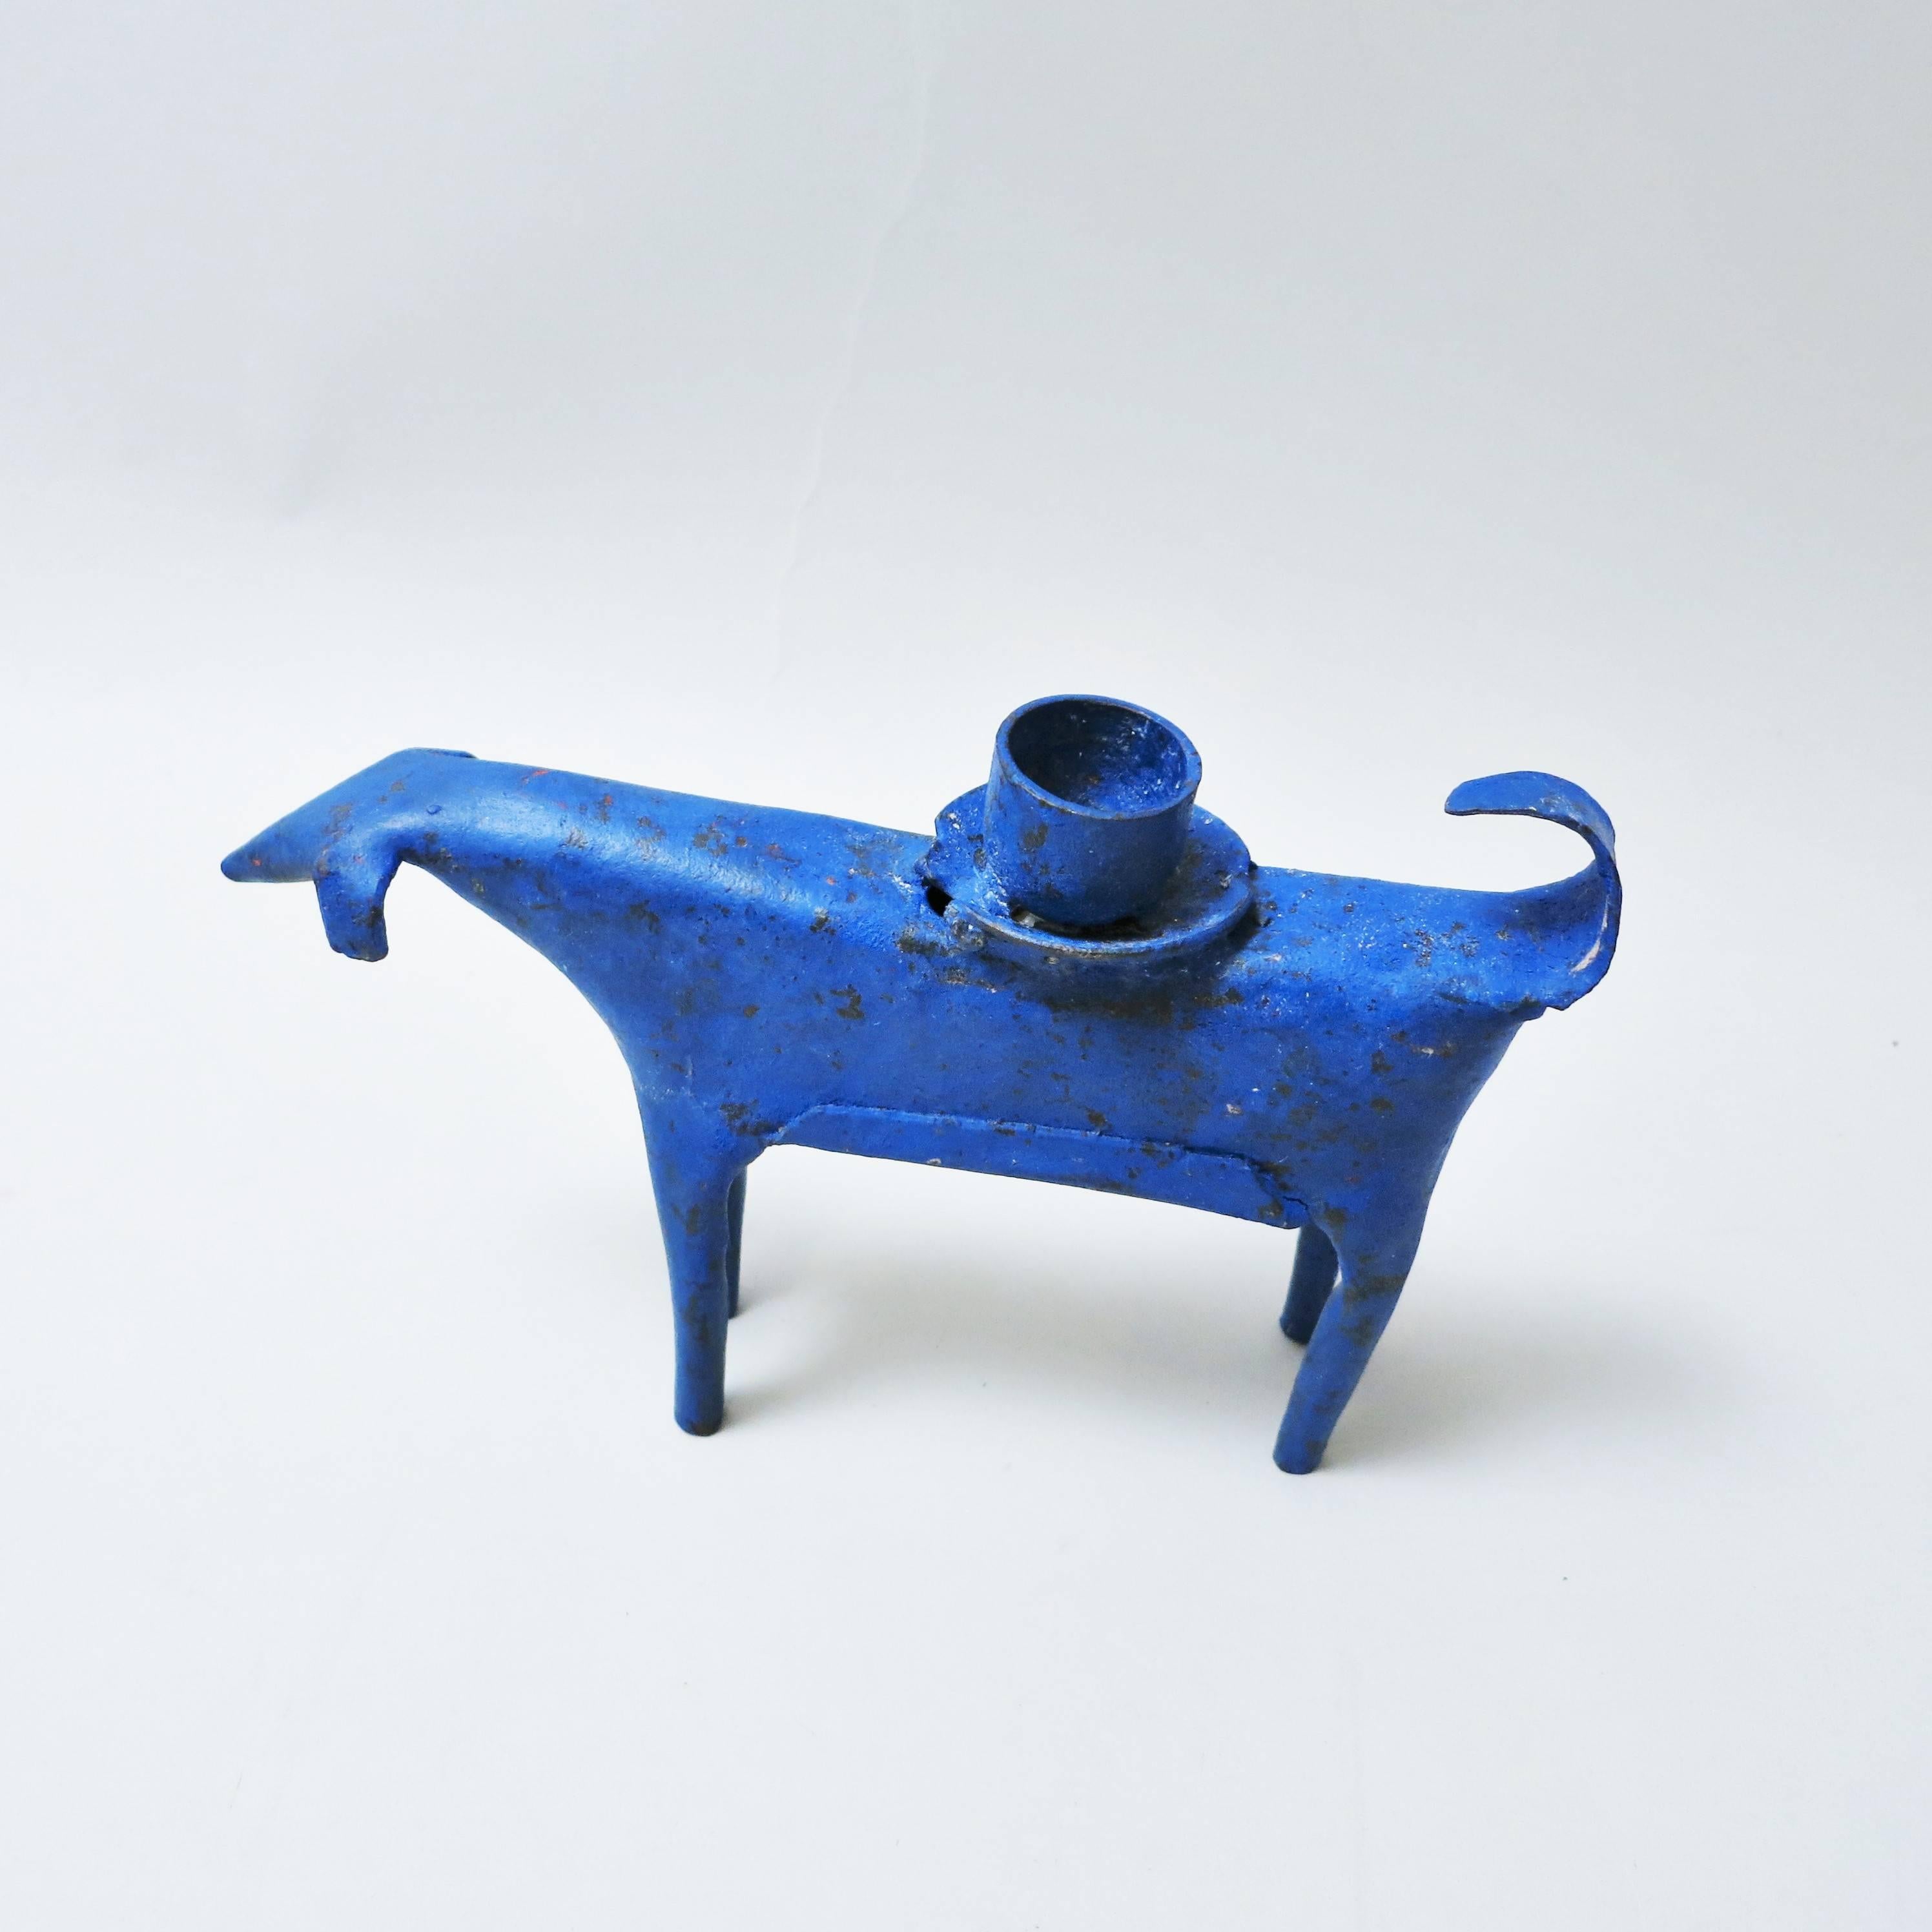 Brutalist candleholder in the shape of a blue dog in the style of Gio Ponti and Paolo De Poli, circa 1955.